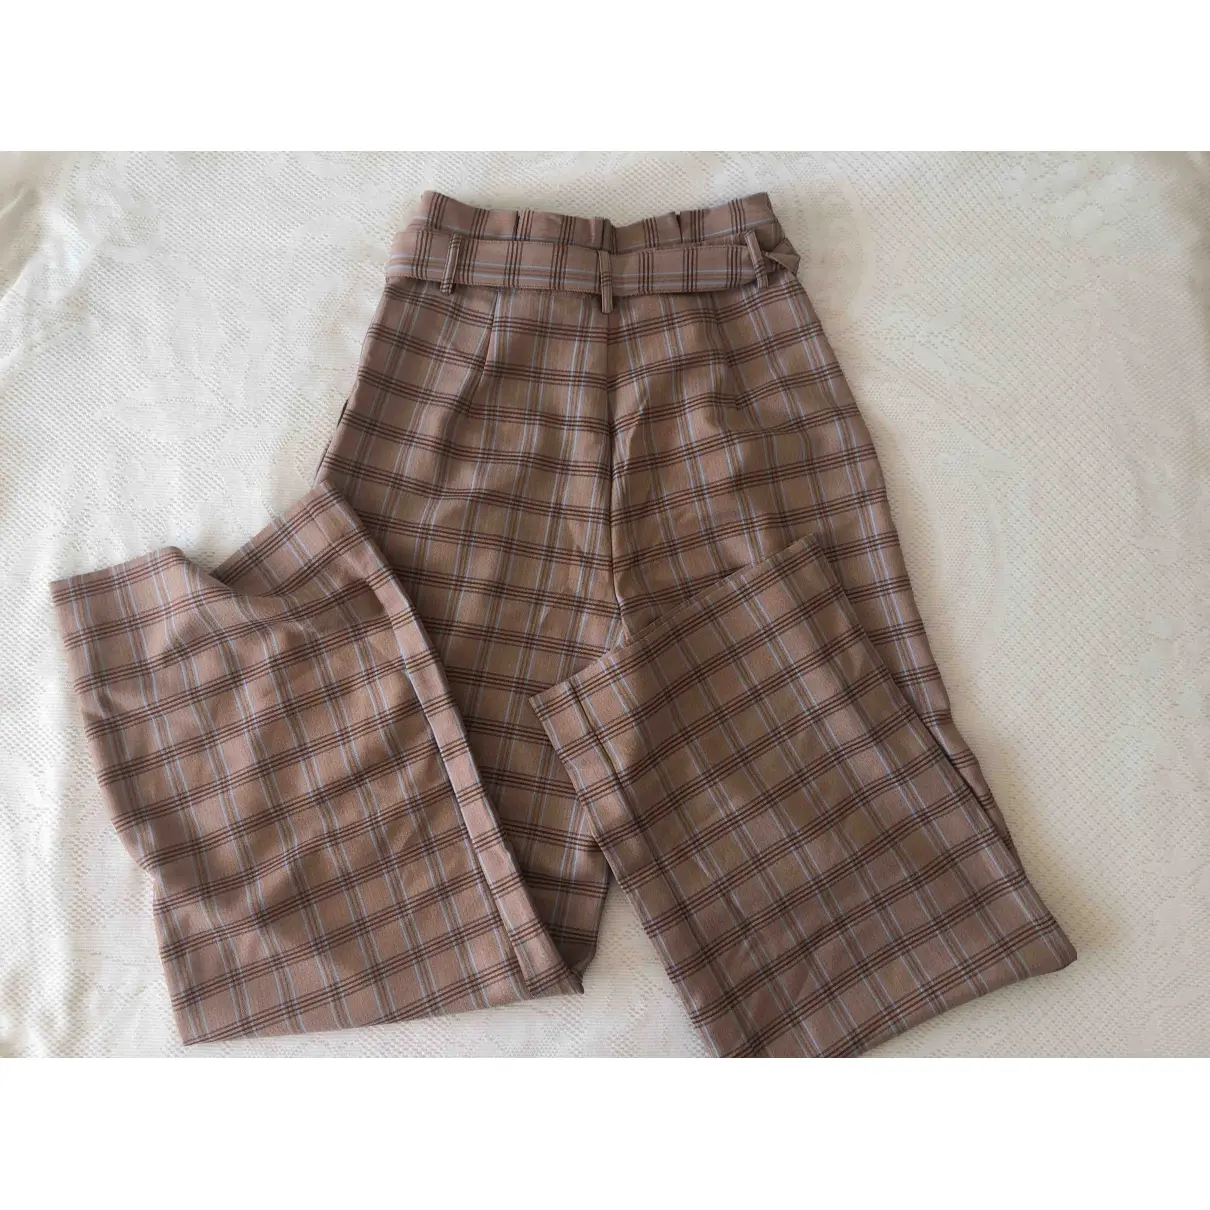 Gestuz Trousers for sale